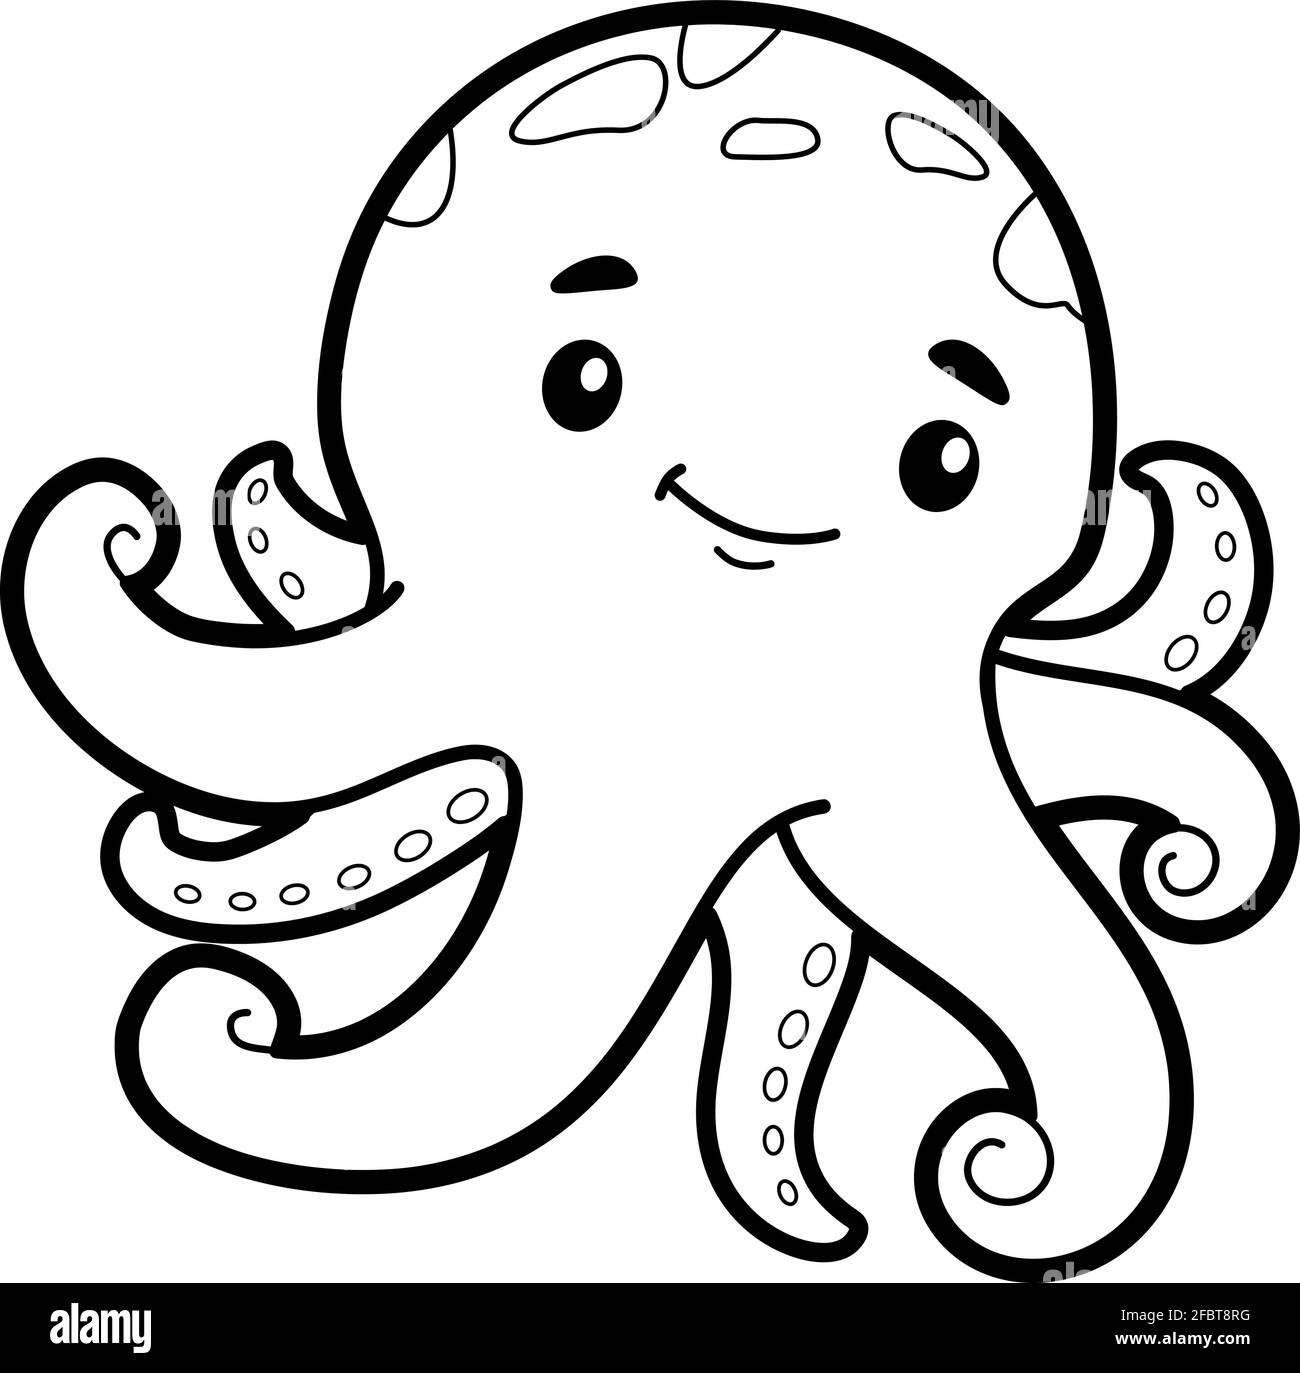 Coloring book or page for kids. octopus black and white vector ...